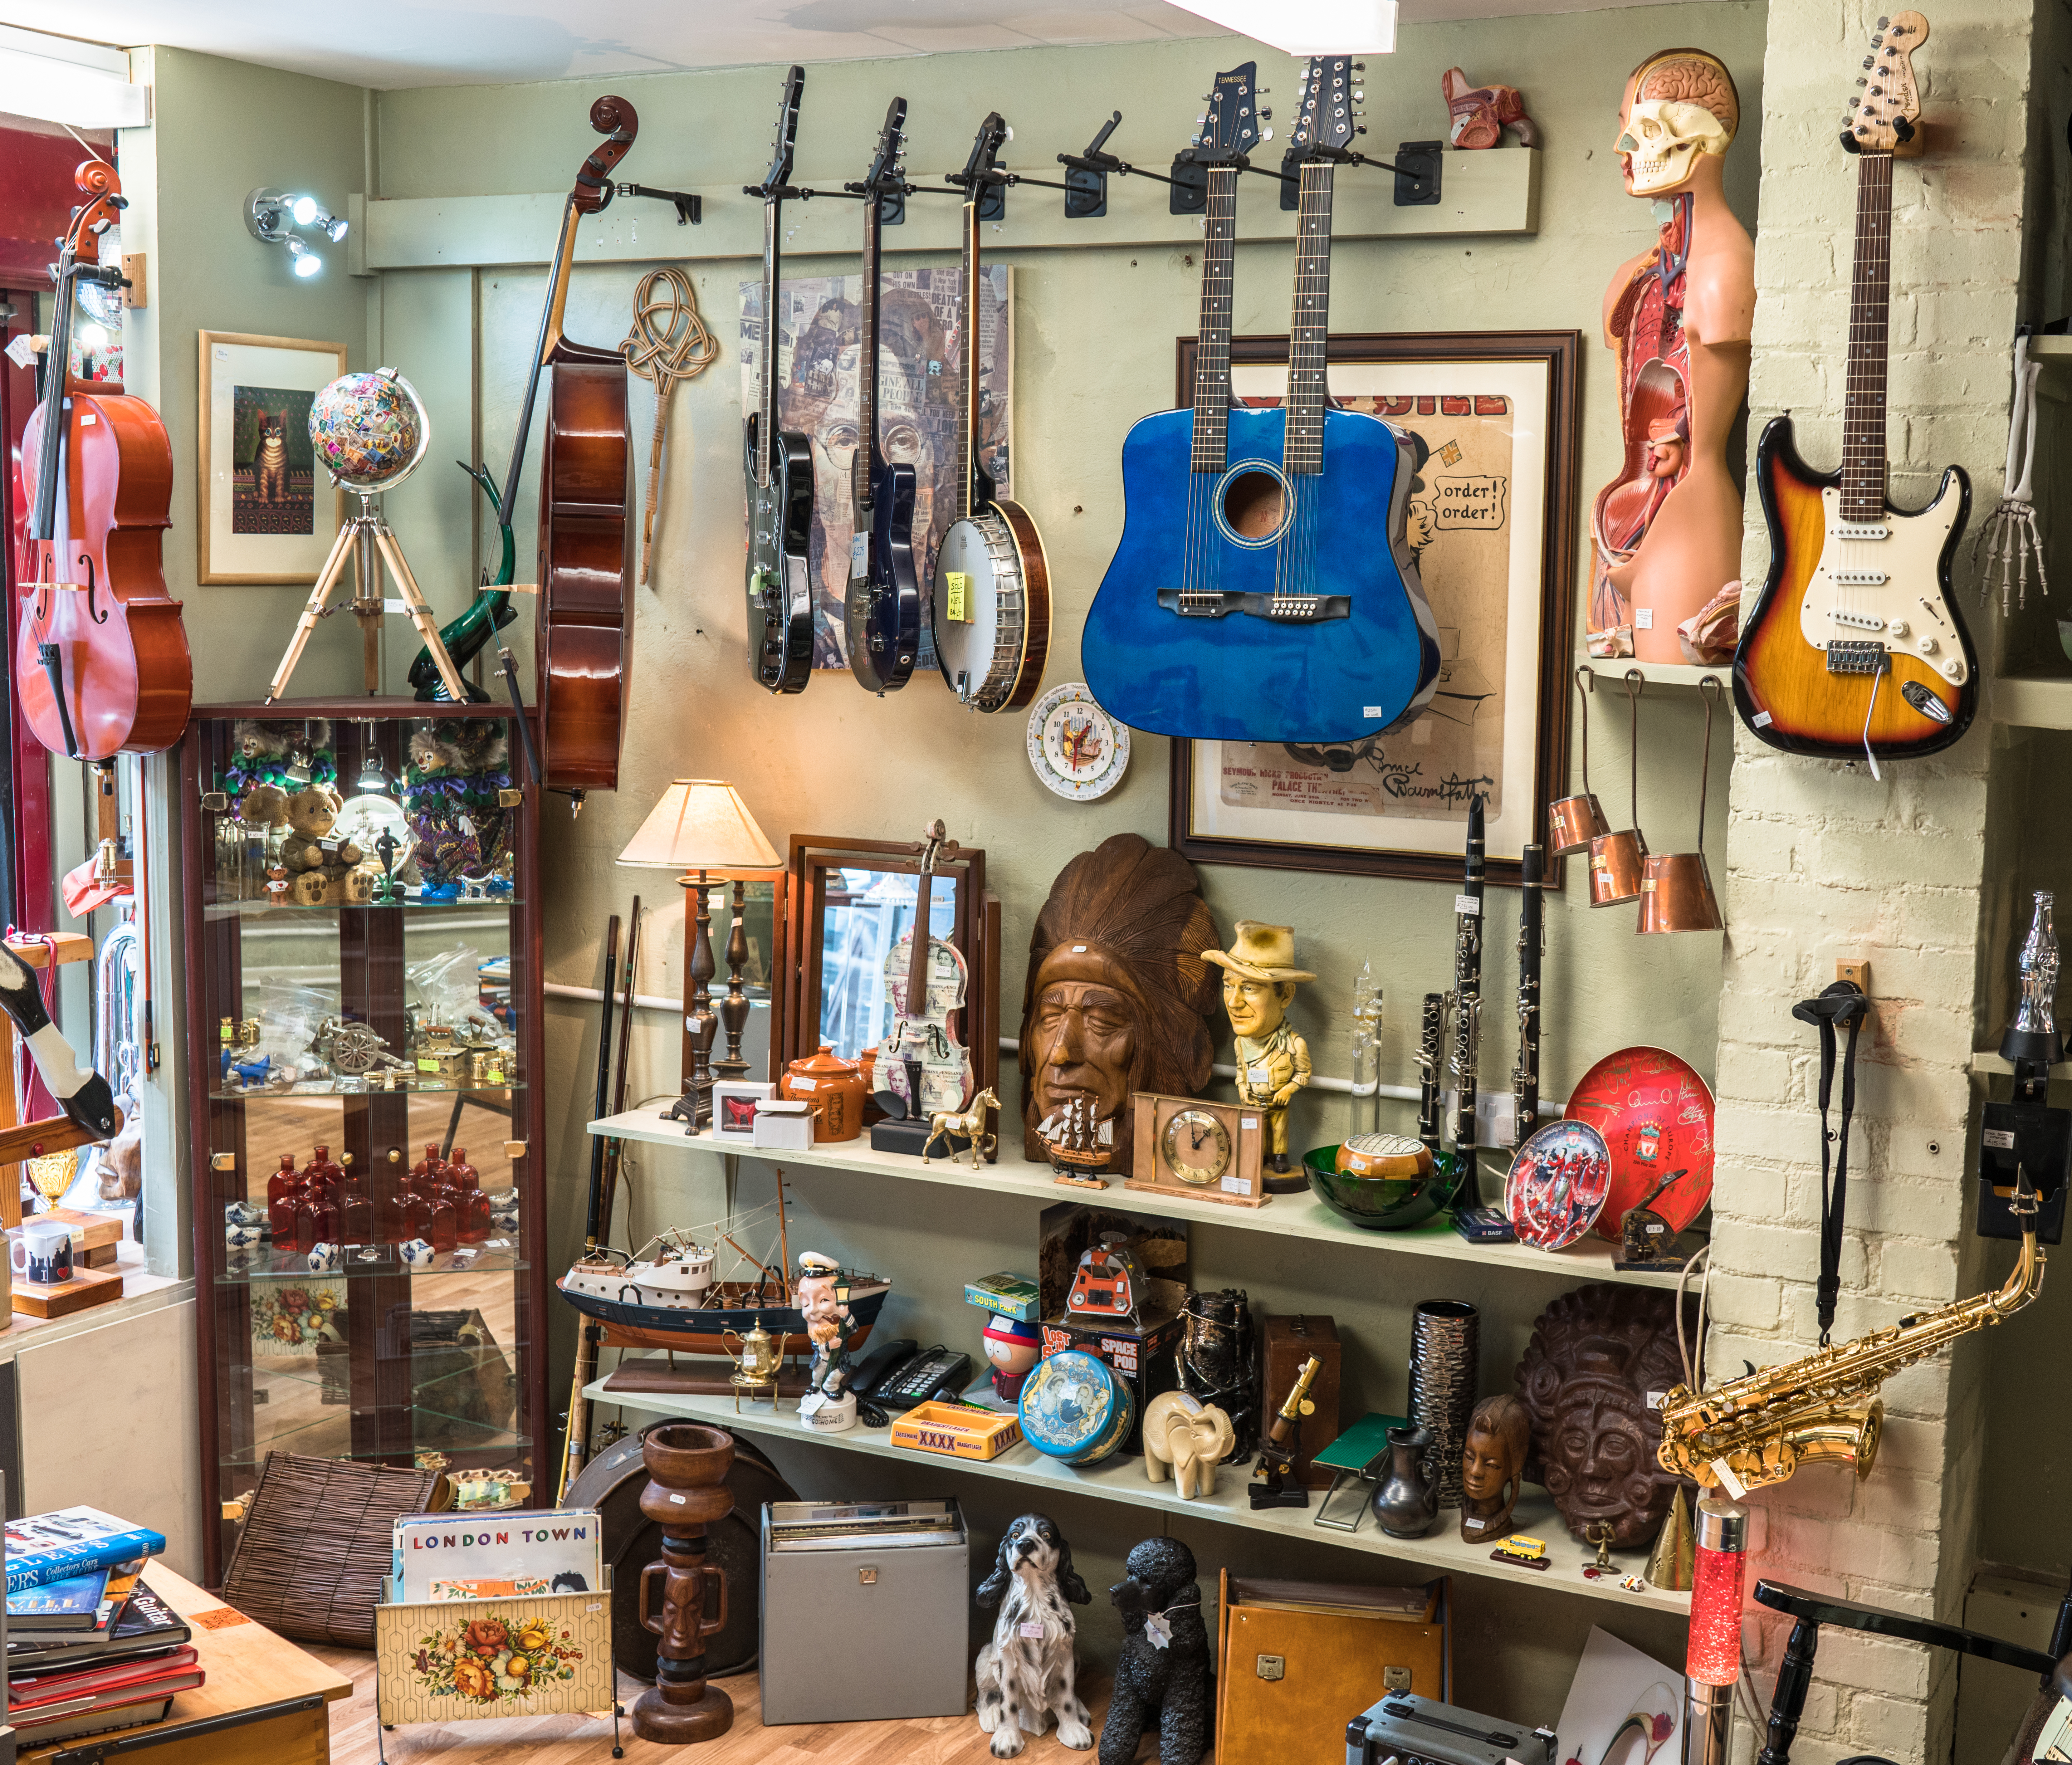 second hand september - shop selling second hand good including guitars and furniture